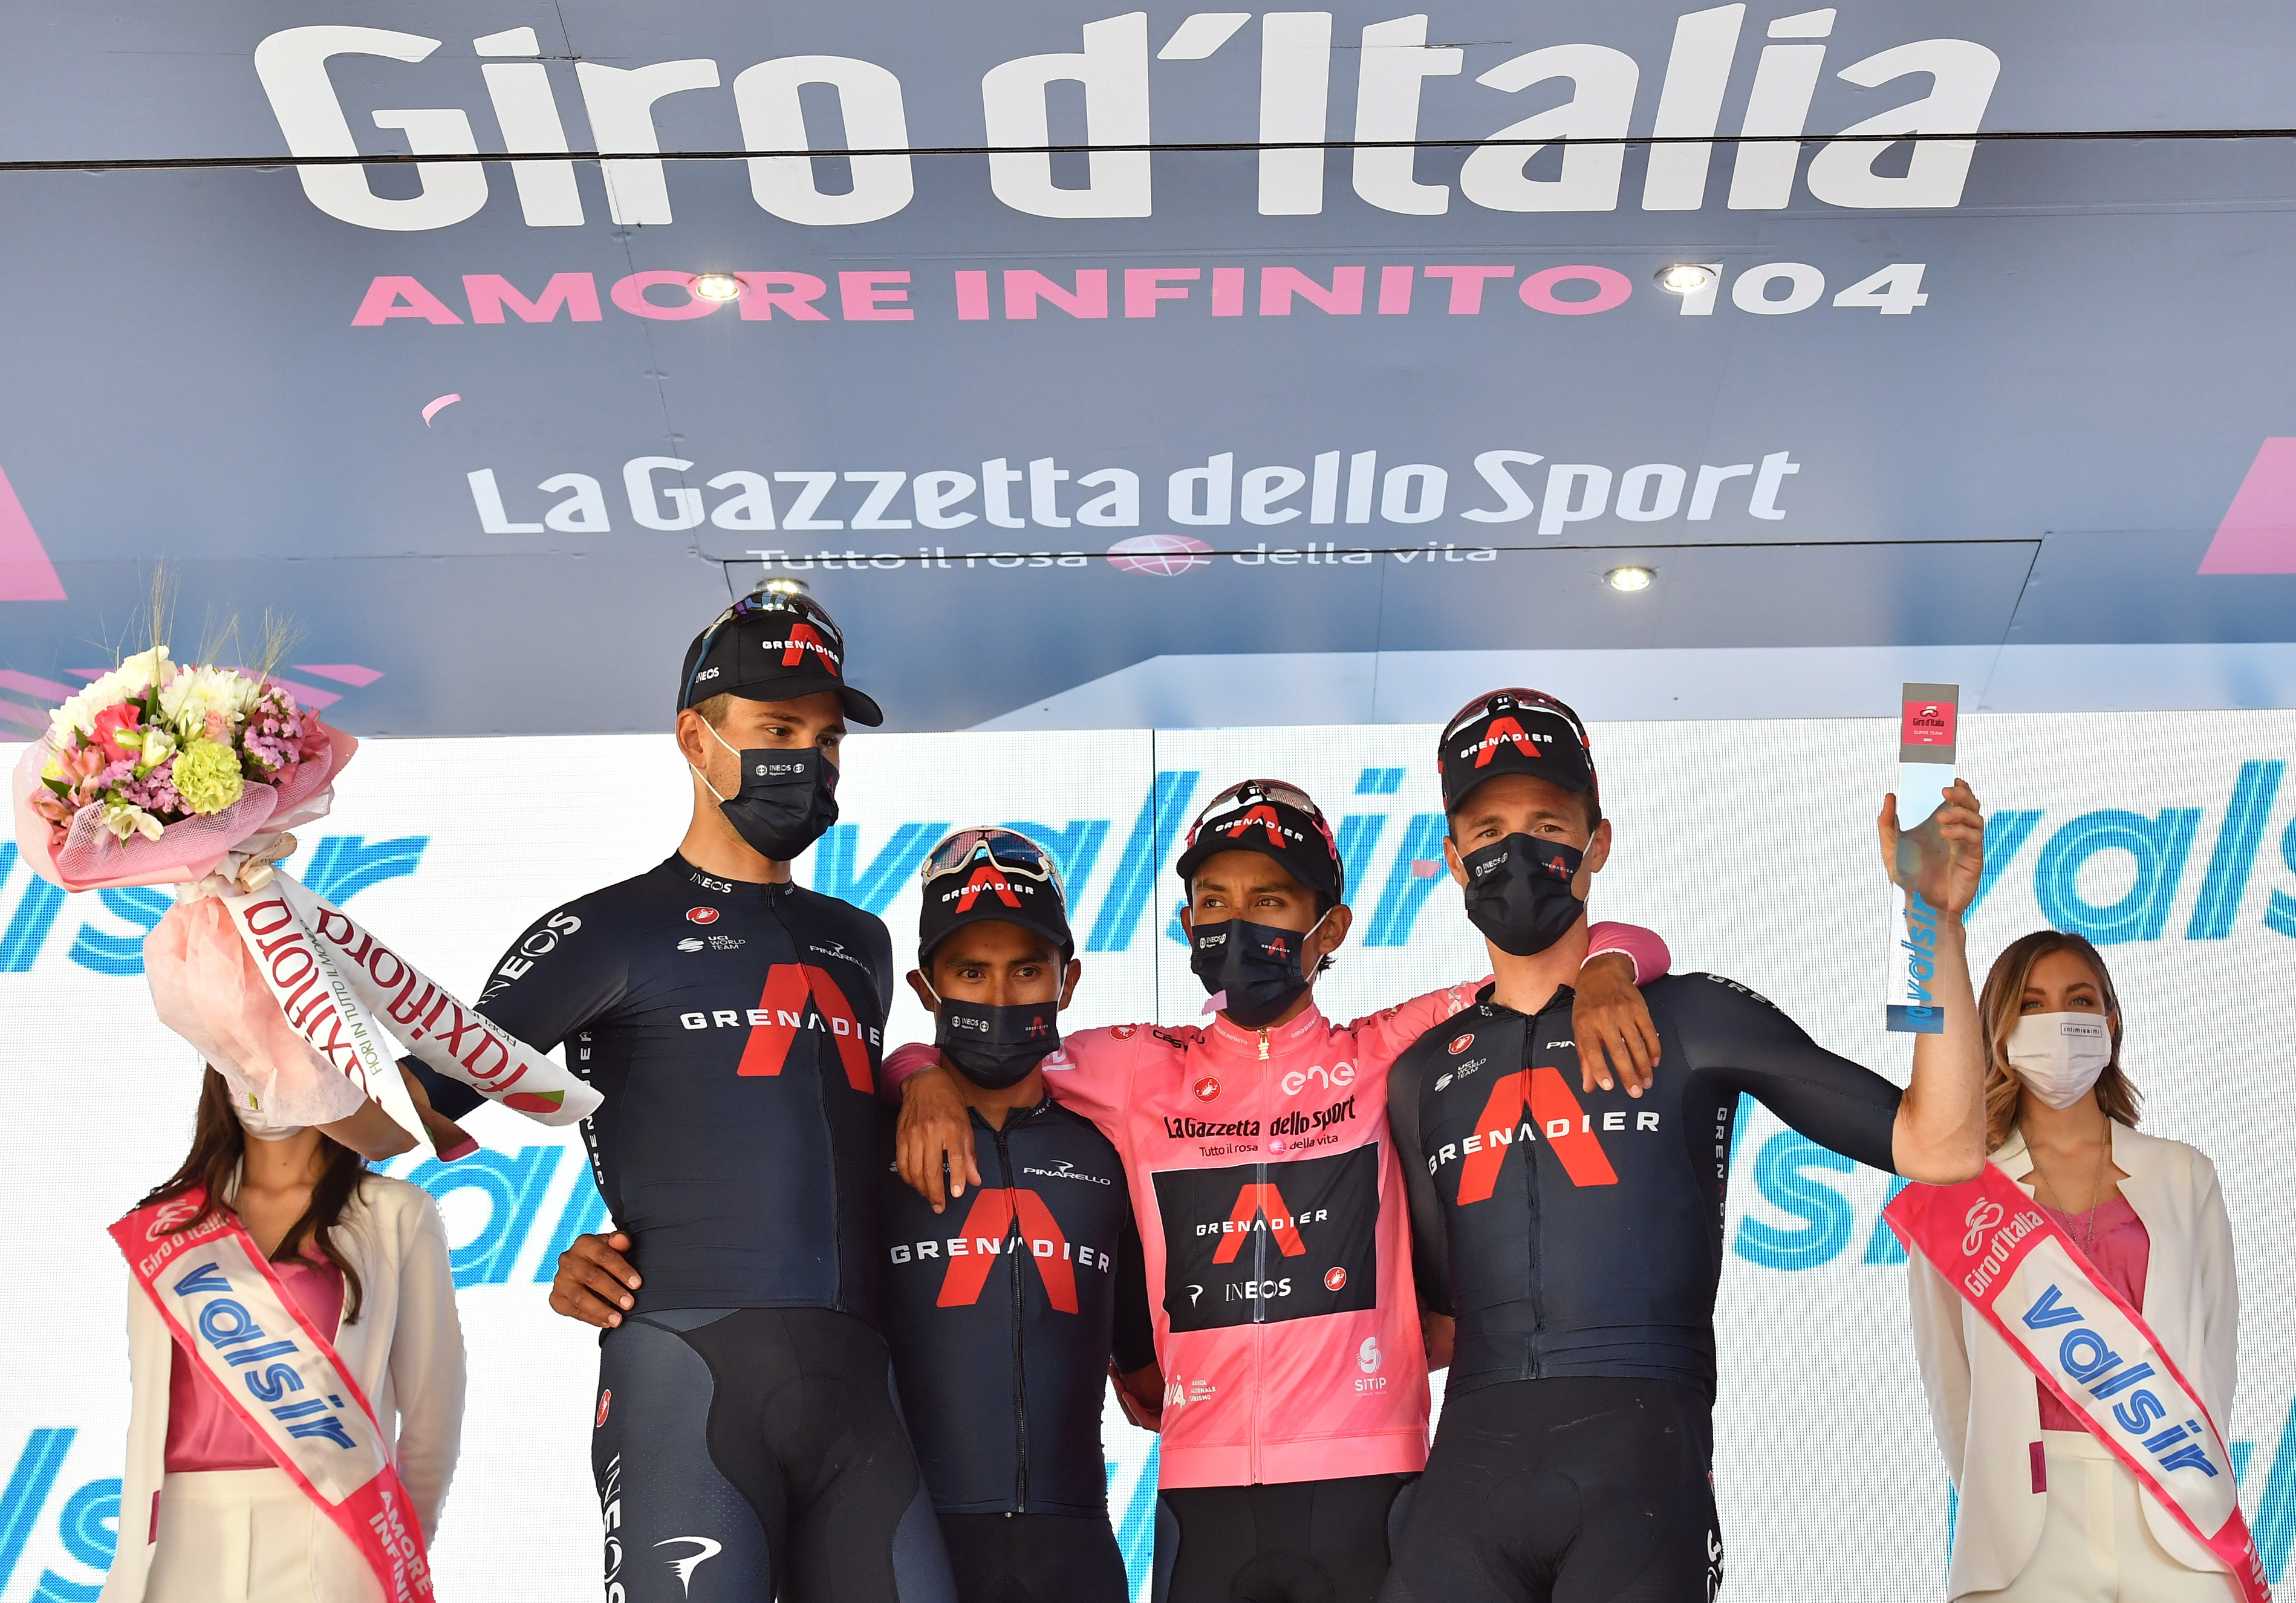 Cycling - Giro d'Italia - Stage 18 - Rovereto to Stradella, Italy - May 27, 2021 Ineos Grenadiers rider Egan Arley Bernal Gomez of Colombia celebrates wearing the maglia rosa on the podium after stage 18 with Jonathan Narvaez,  Salvatore Puccio and Filippo Ganna REUTERS/Jennifer Lorenzini